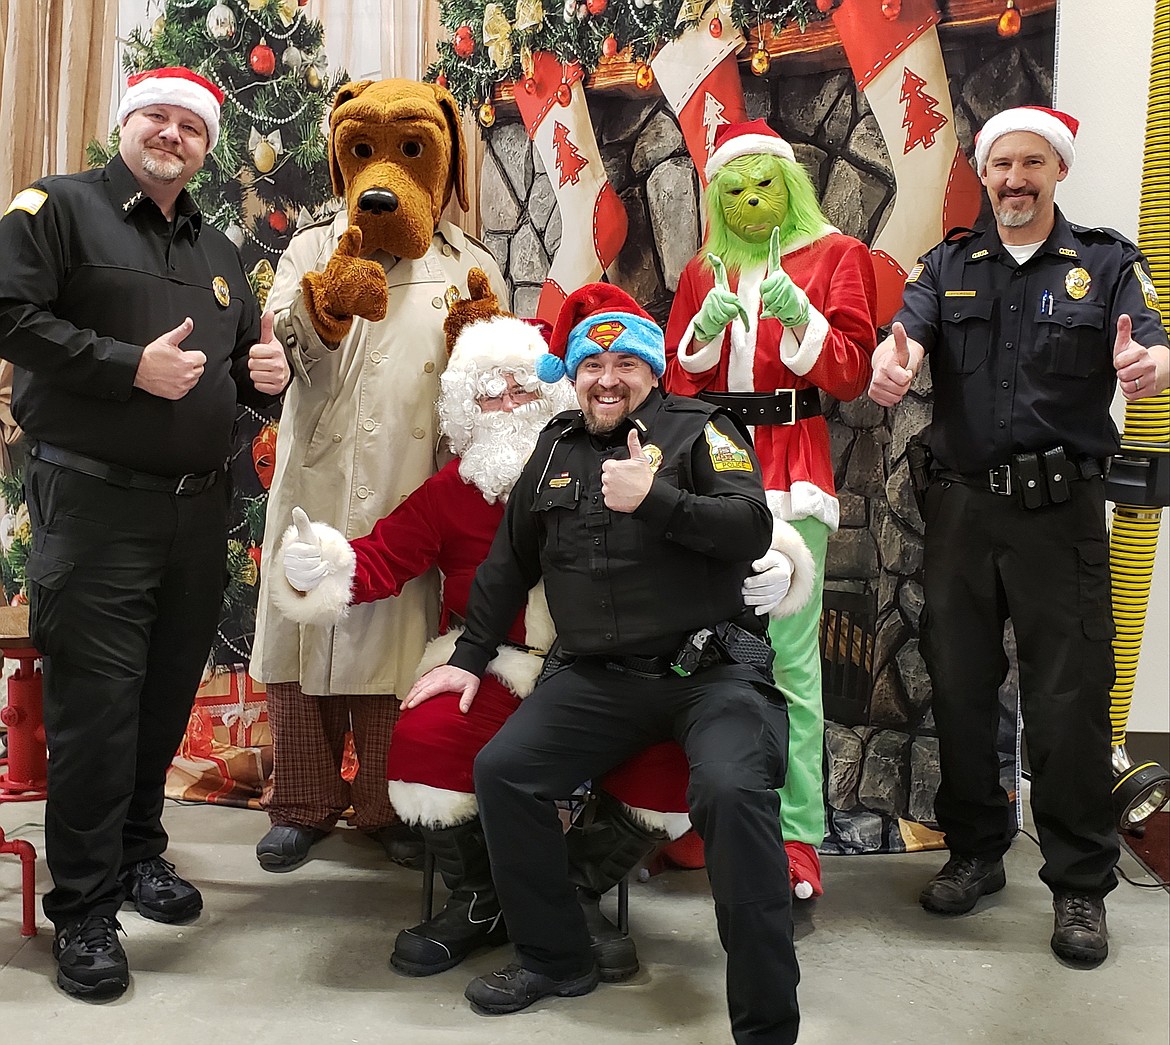 Photo by HEATHER COWAN
Osburn Police Chief Darrel Braaten, officer Jason Woody and reserve officer Corey Thompson pose with the events special guests &#151; McGruff the Crime Dog, Santa and the Grinch.